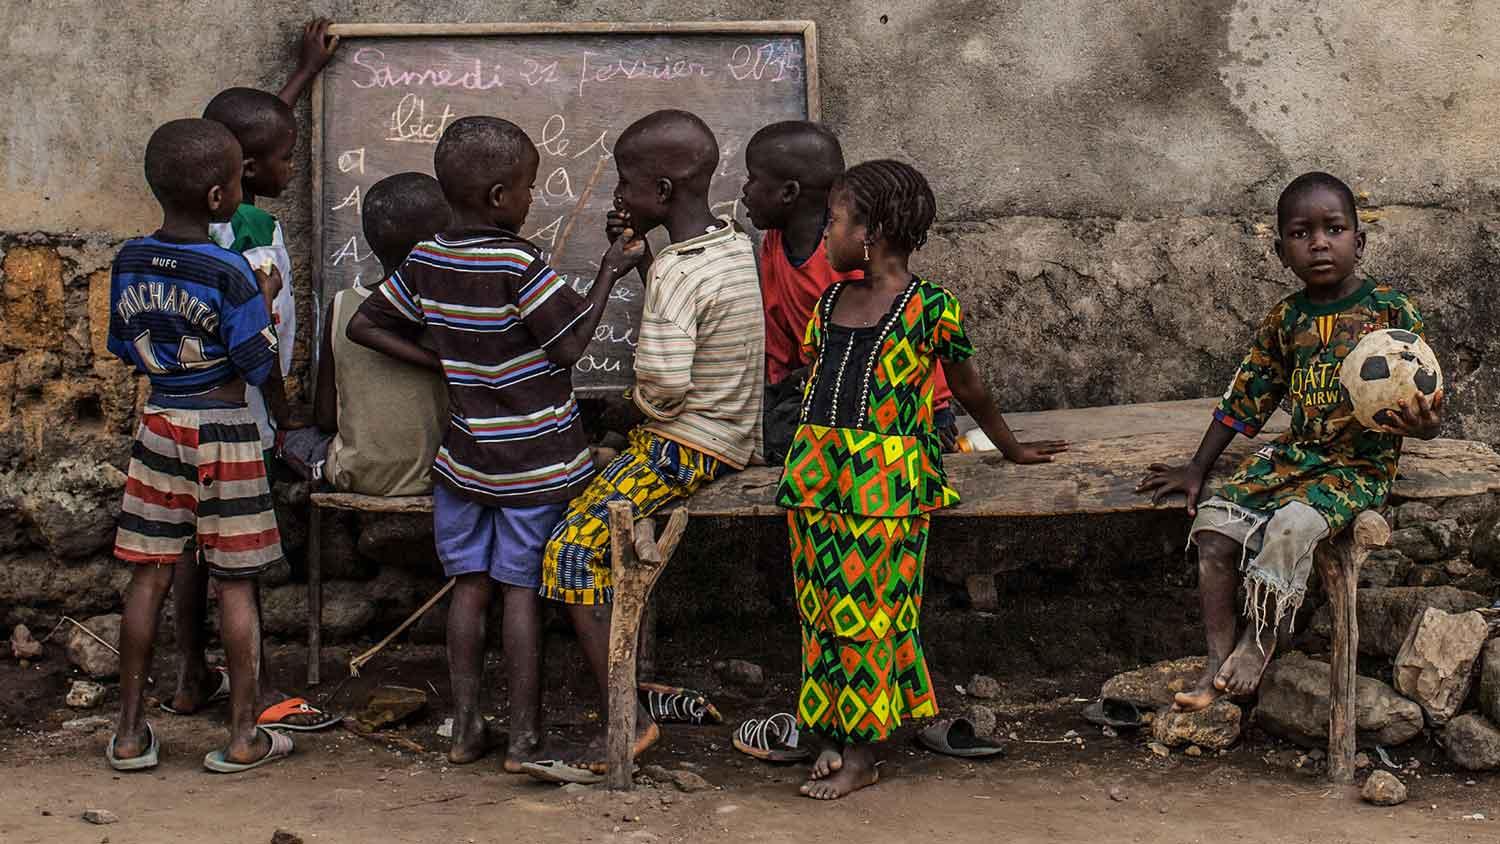 Young kids take part in informal French language lessons in the village of Meliandou, Guinea, ground zero for the West African Ebola outbreak.